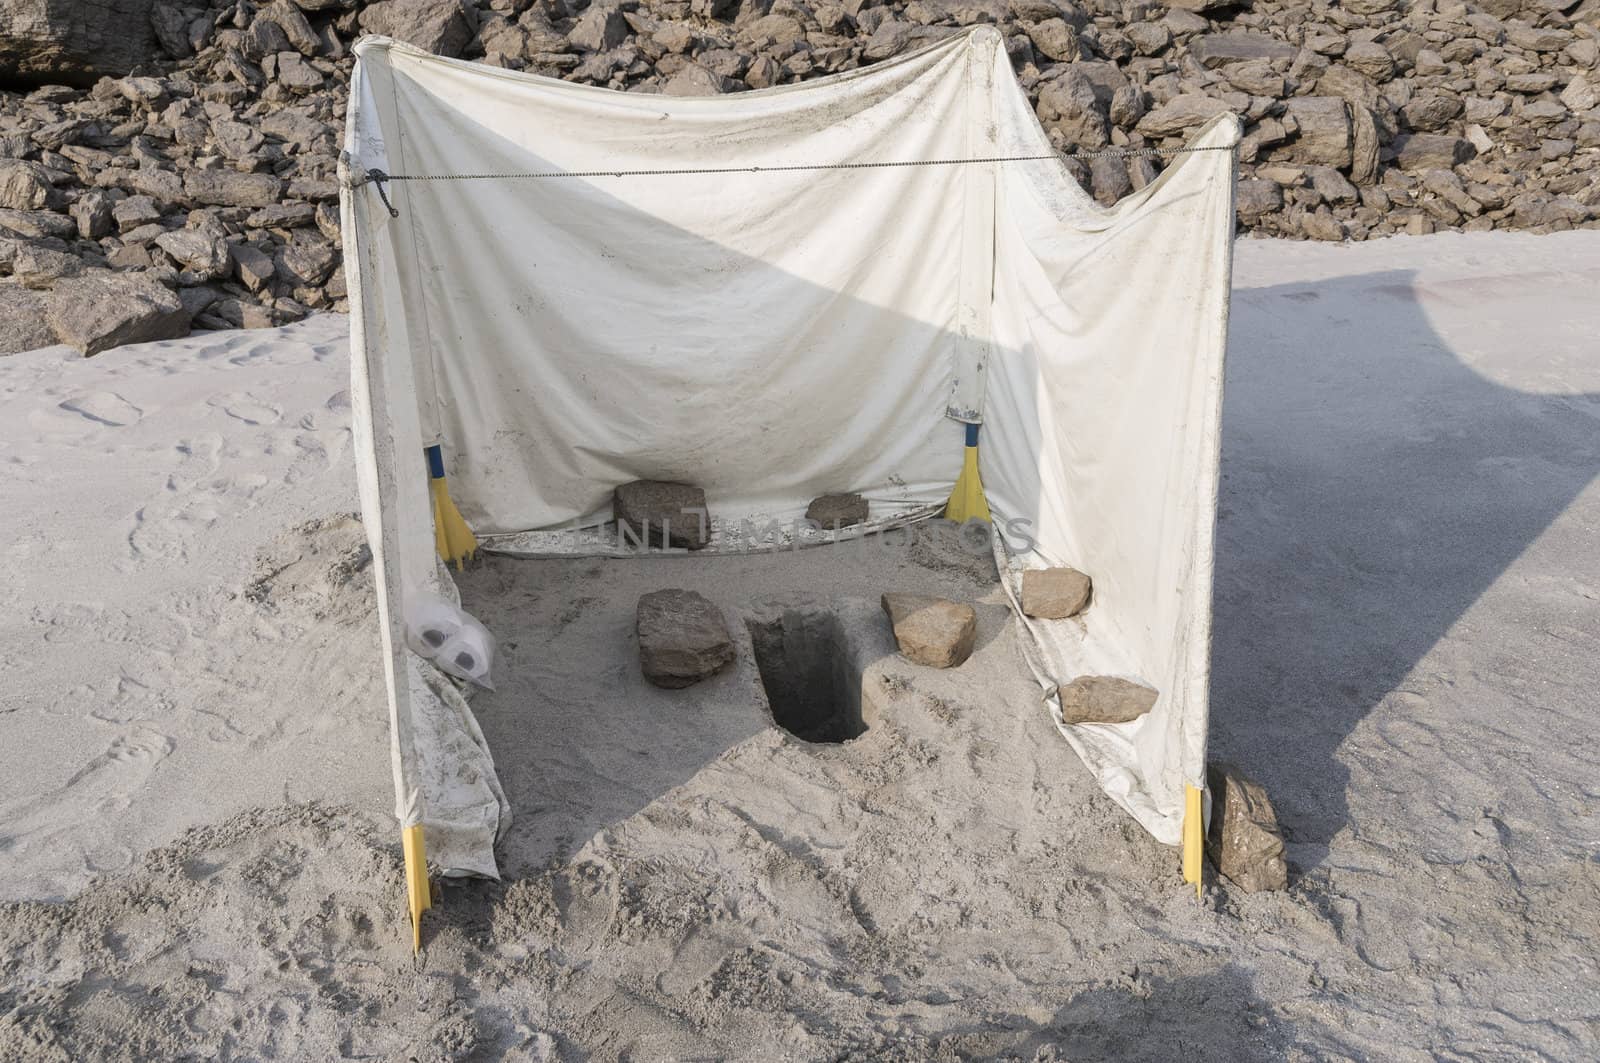 toilet used at an adventure trip. whole in the sand with a plastic foil around